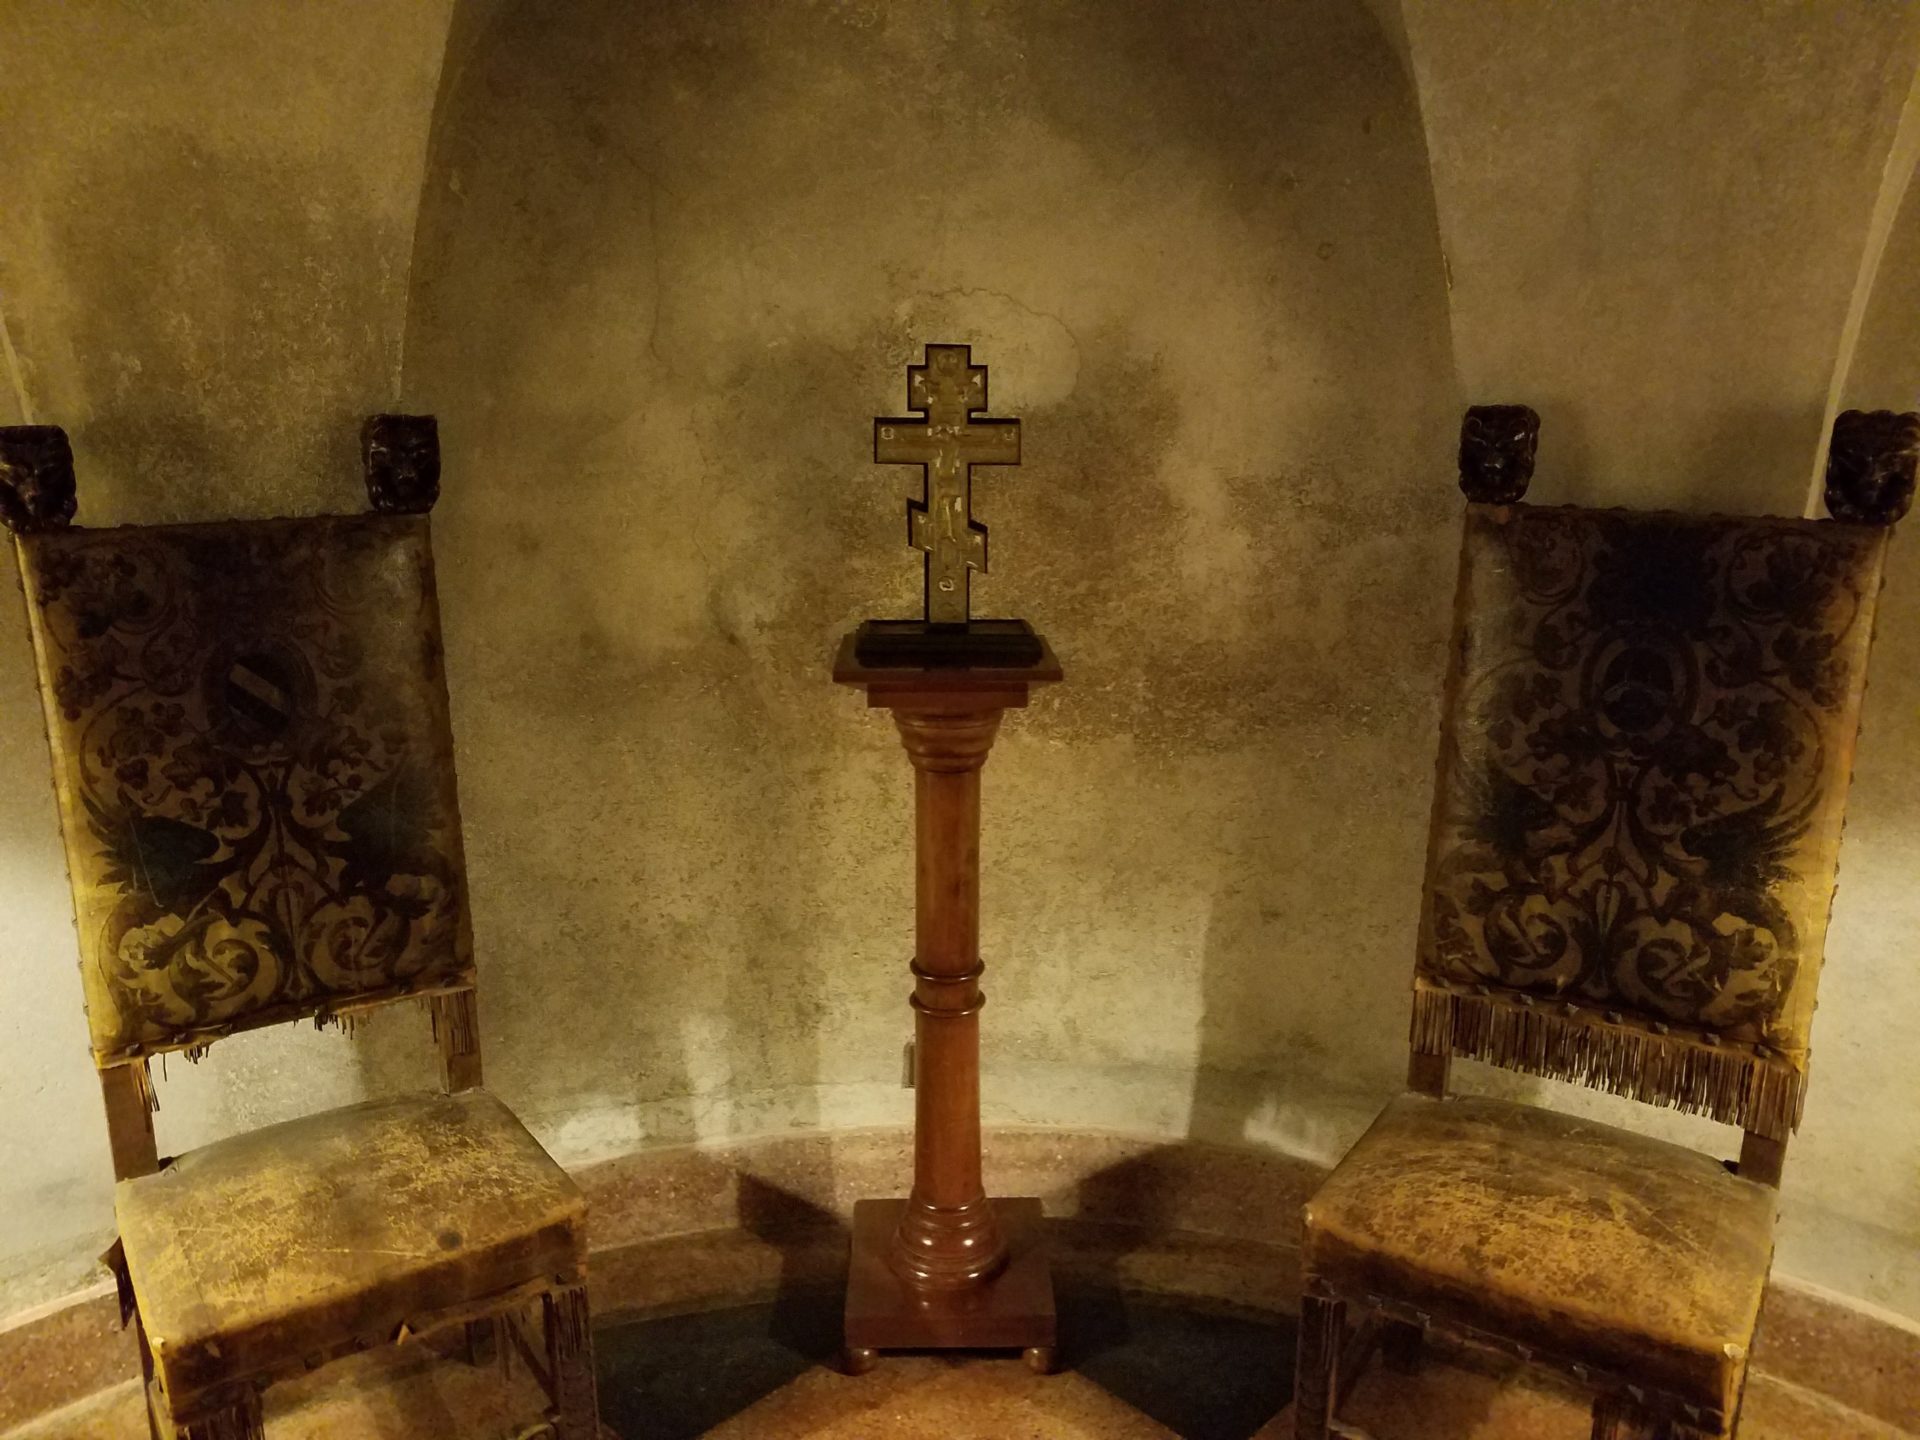 a cross on a stand in a room with chairs